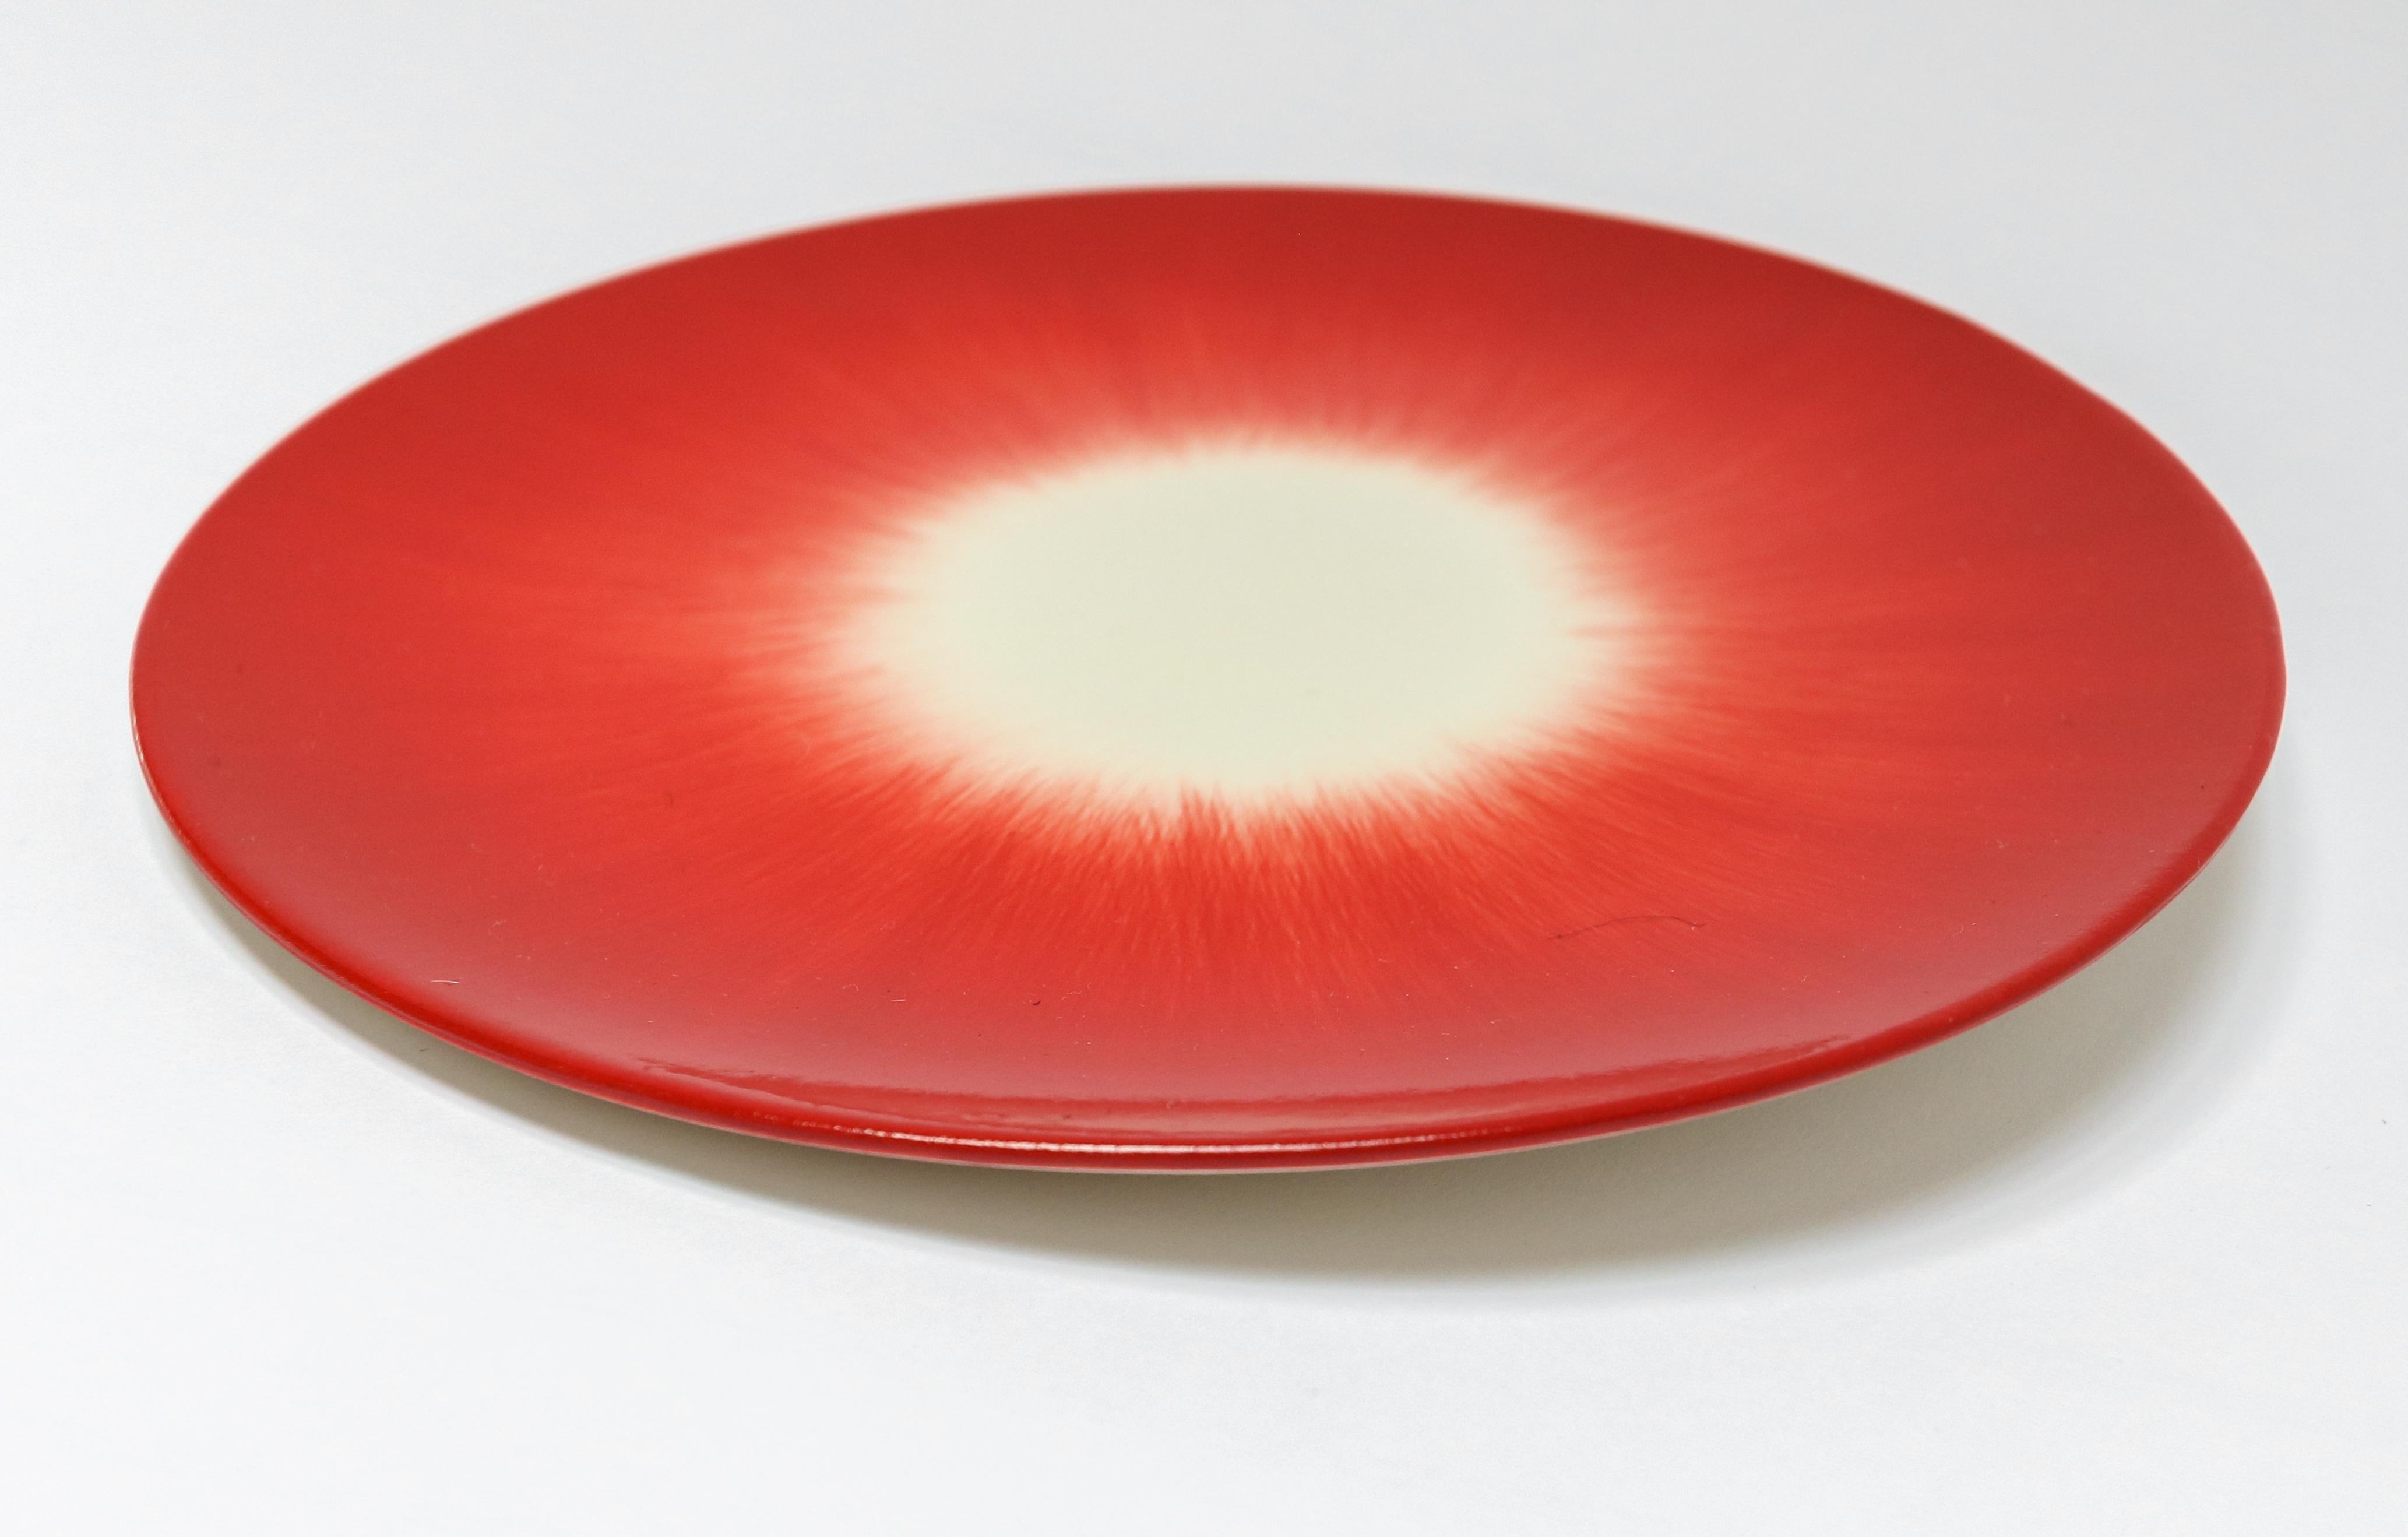 Ann Demeulemeester for Serax Dé bread plate in off white / red. Hand painted with a starburst pattern. 14cm diameter x 0.7 cm high. Must be purchased in quantities of two.